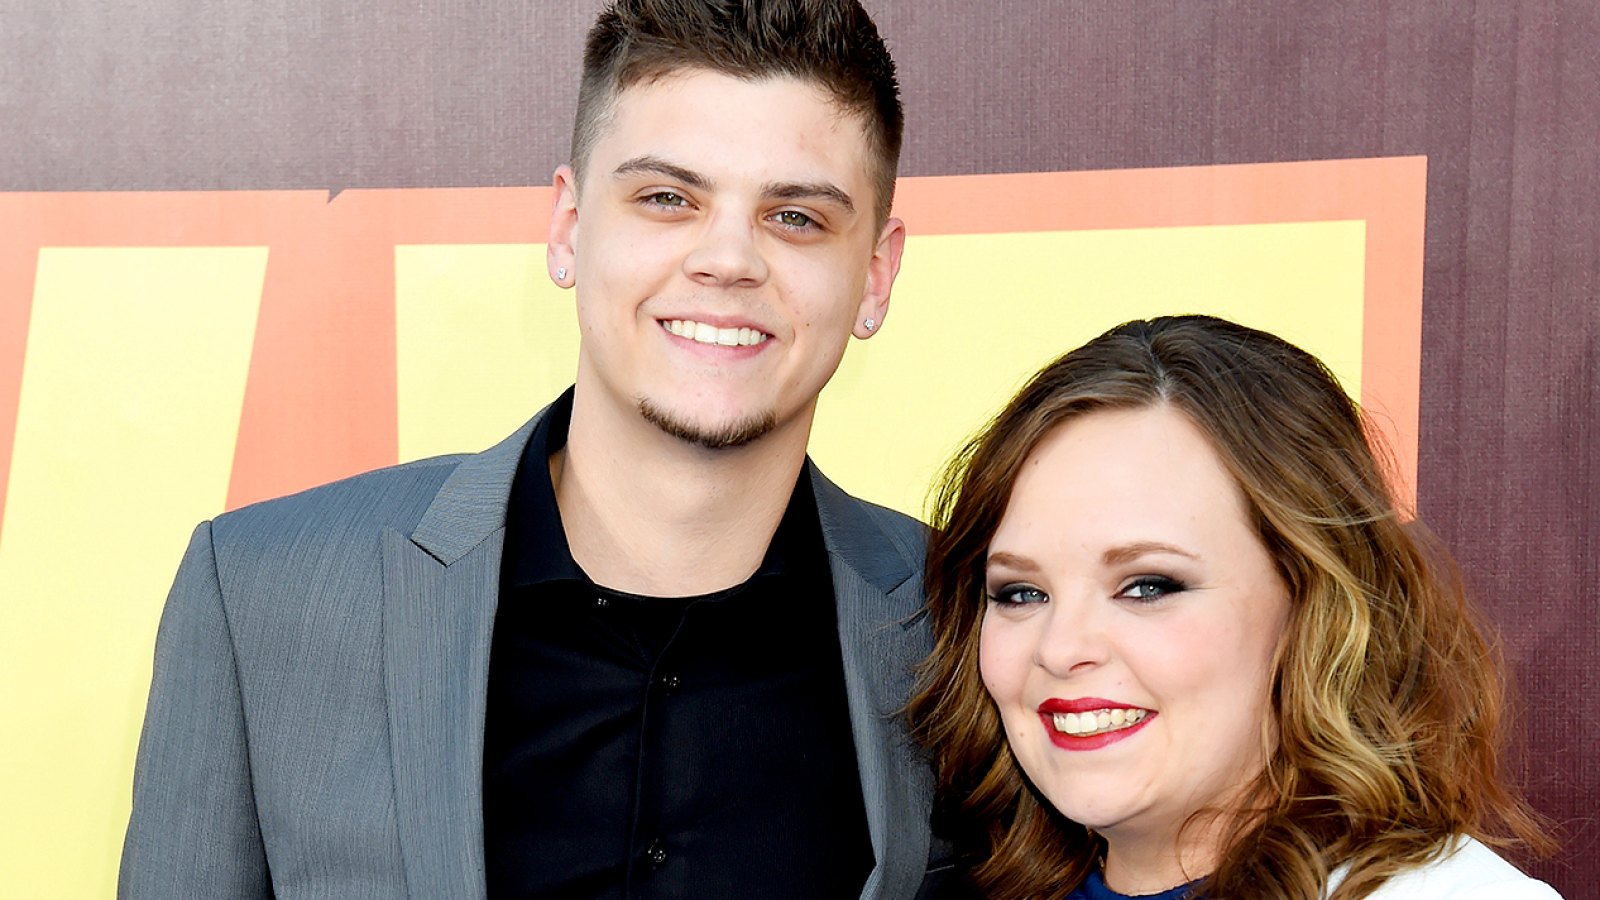 Tyler Baltierra and Catelynn Lowell attend The 2015 MTV Movie Awards at Nokia Theatre L.A. Live on April 12, 2015 in Los Angeles, California.